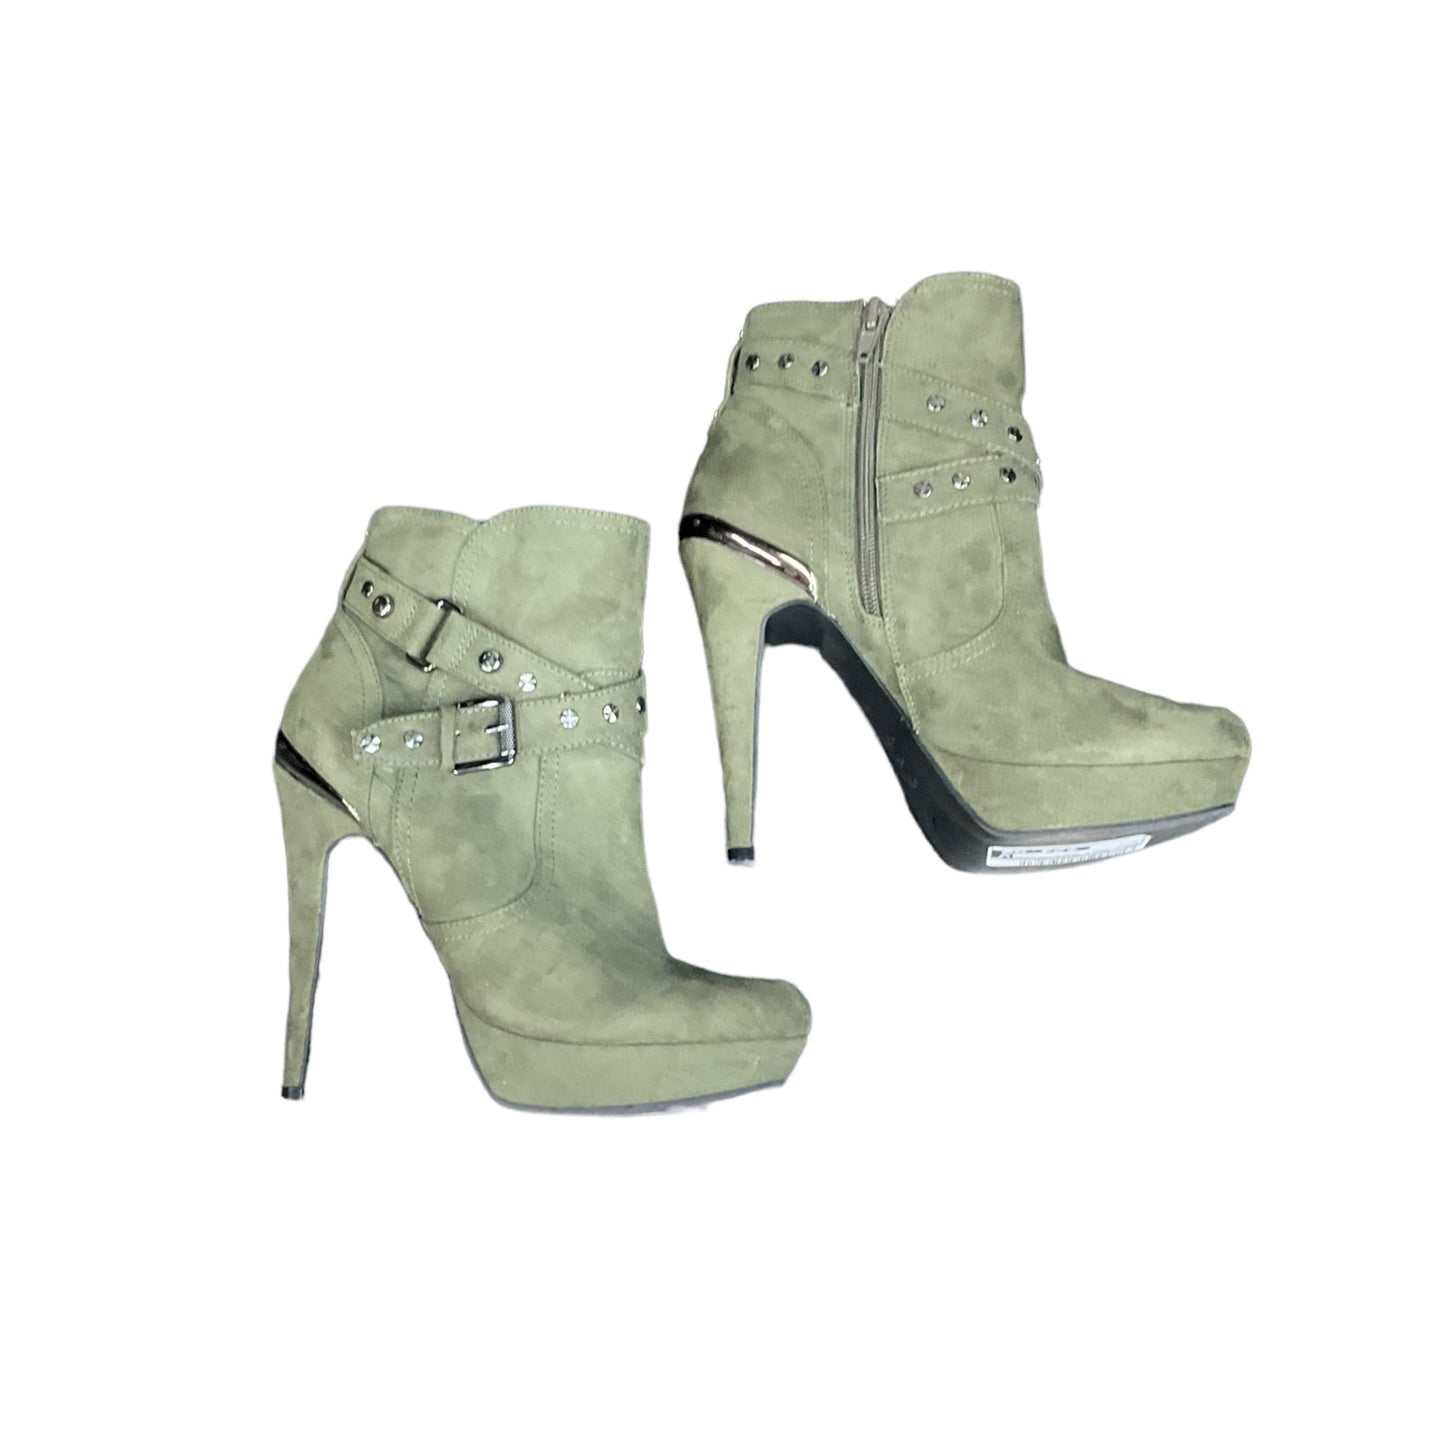 Boots Ankle Heels By Guess  Size: 7